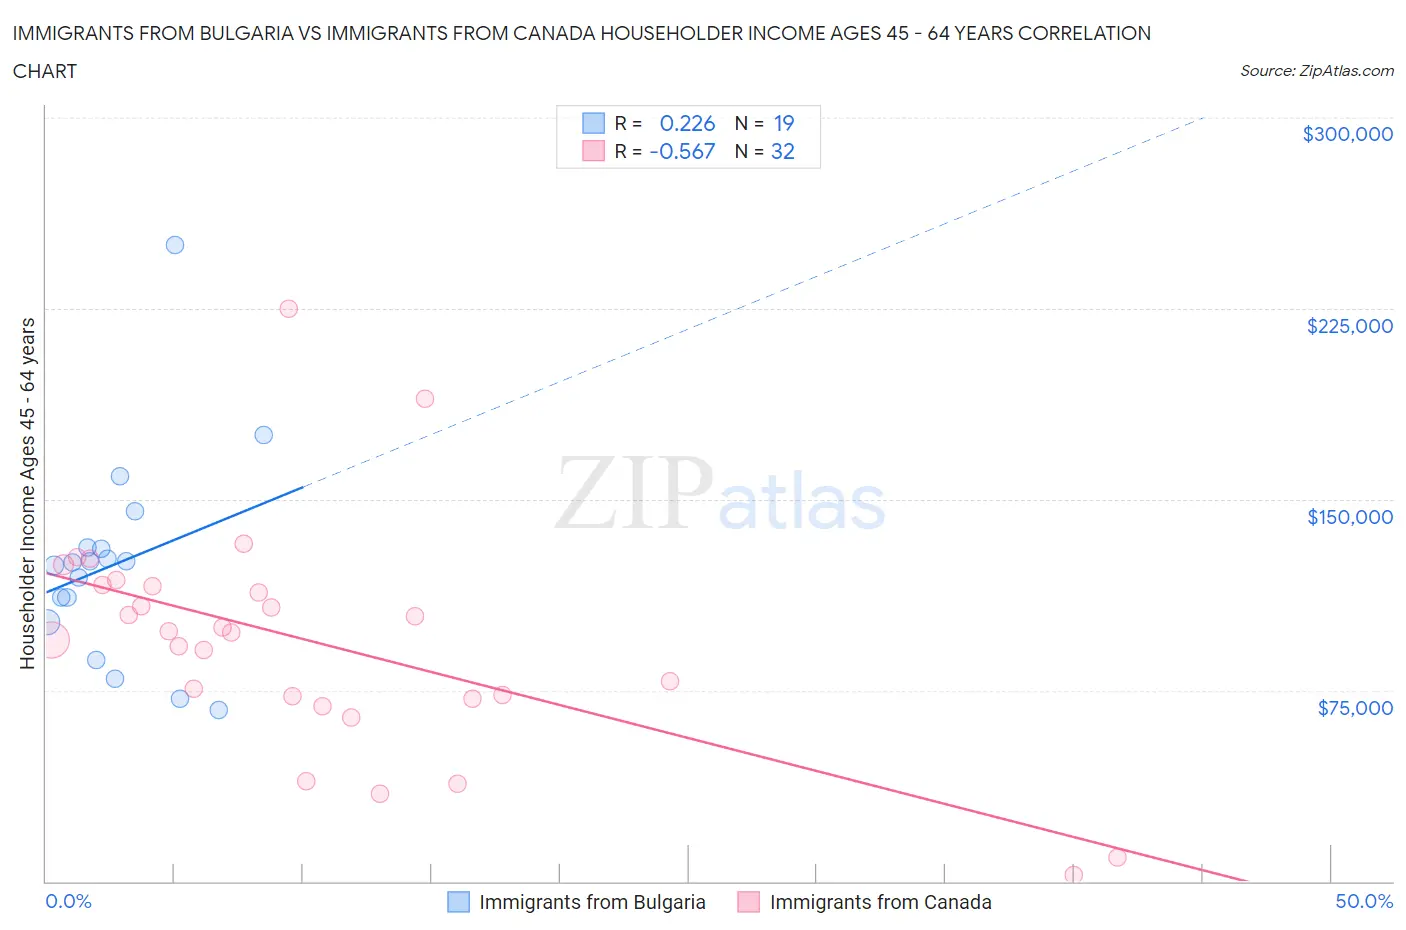 Immigrants from Bulgaria vs Immigrants from Canada Householder Income Ages 45 - 64 years